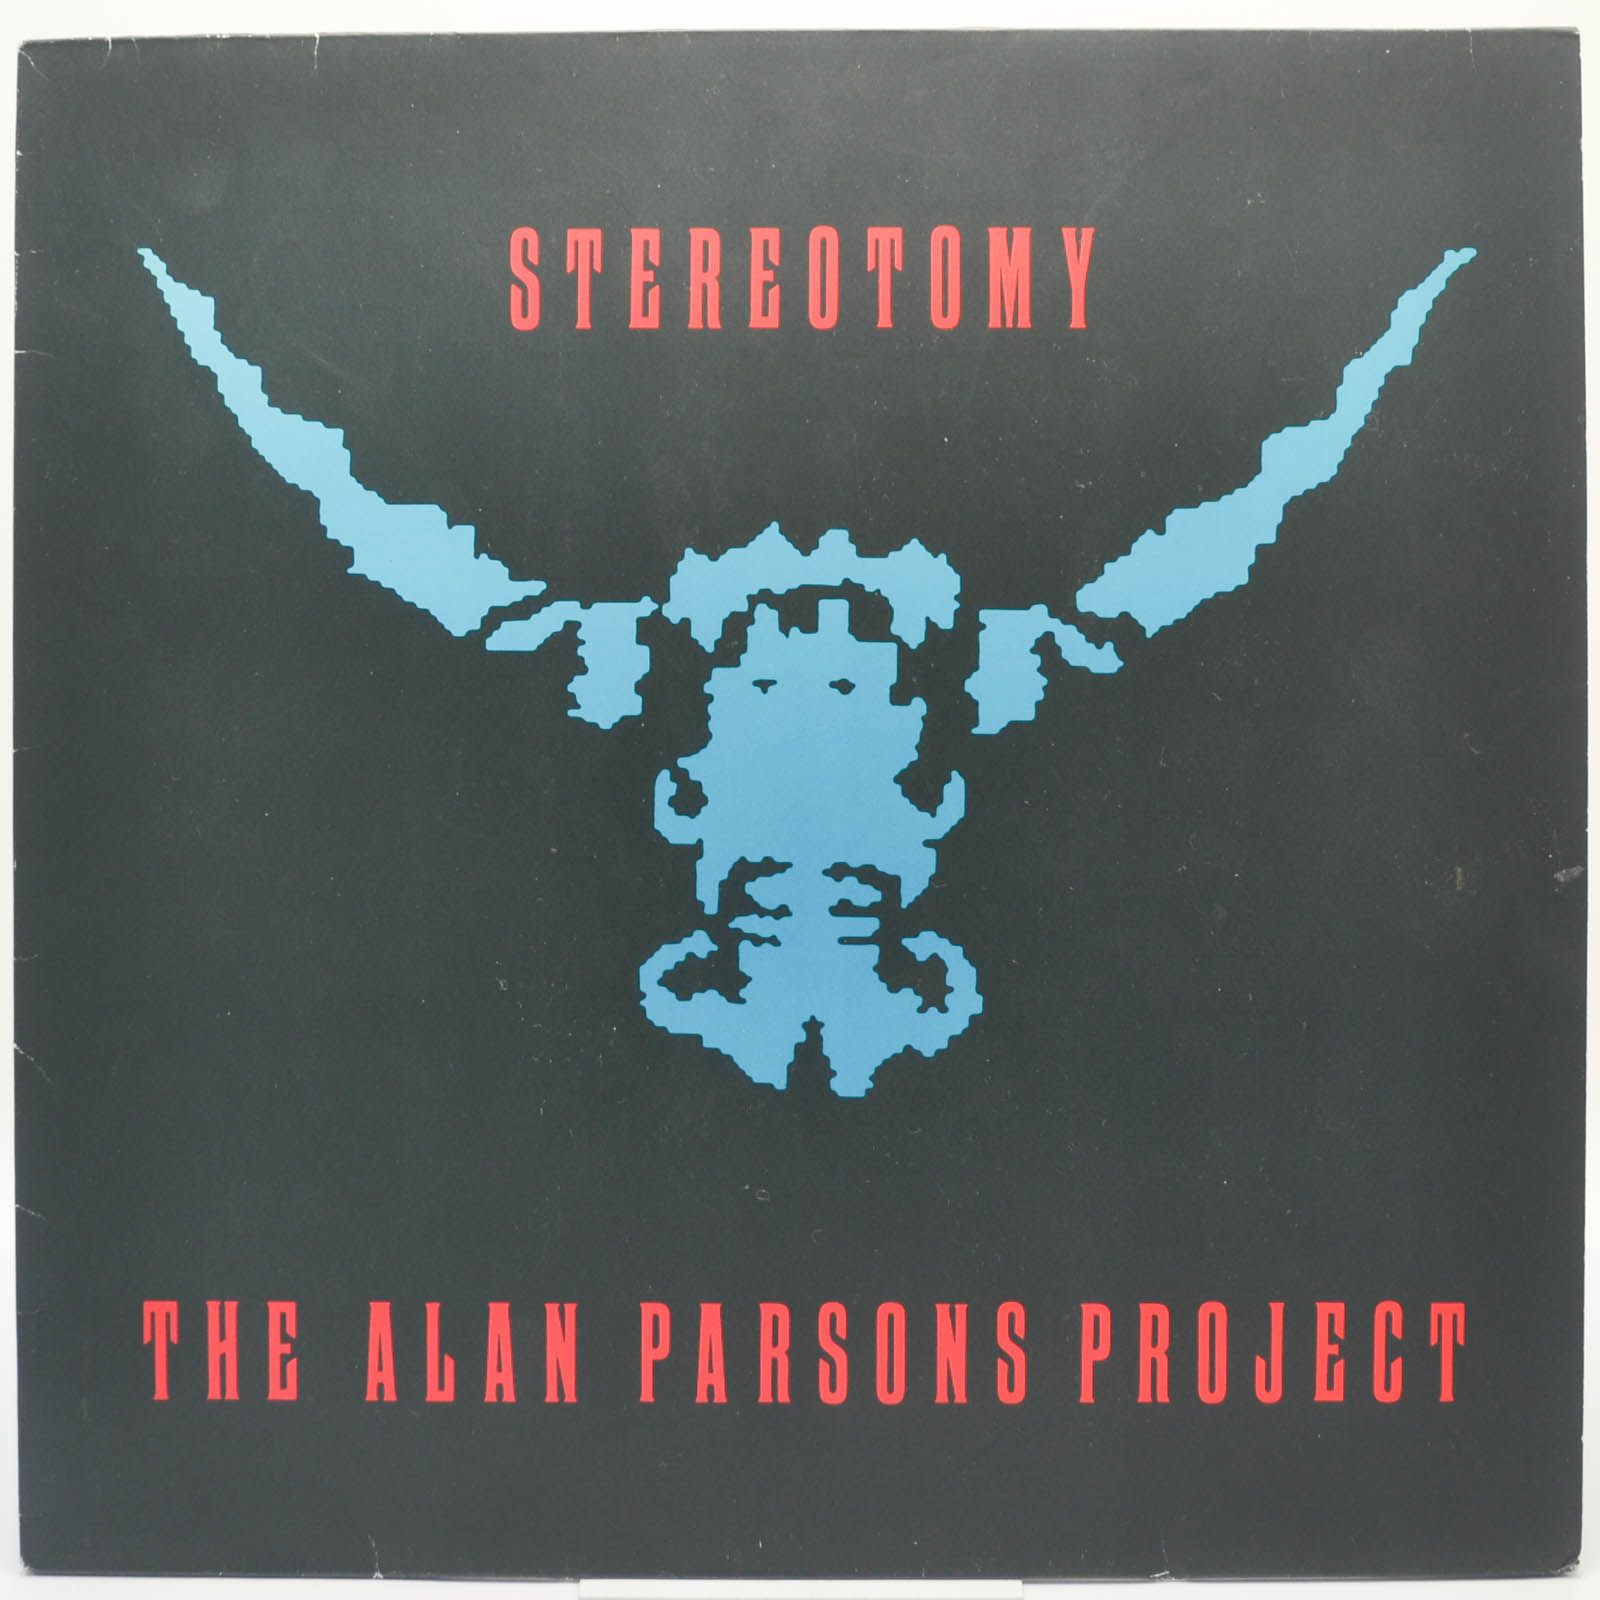 Alan Parsons Project — Stereotomy, 1985